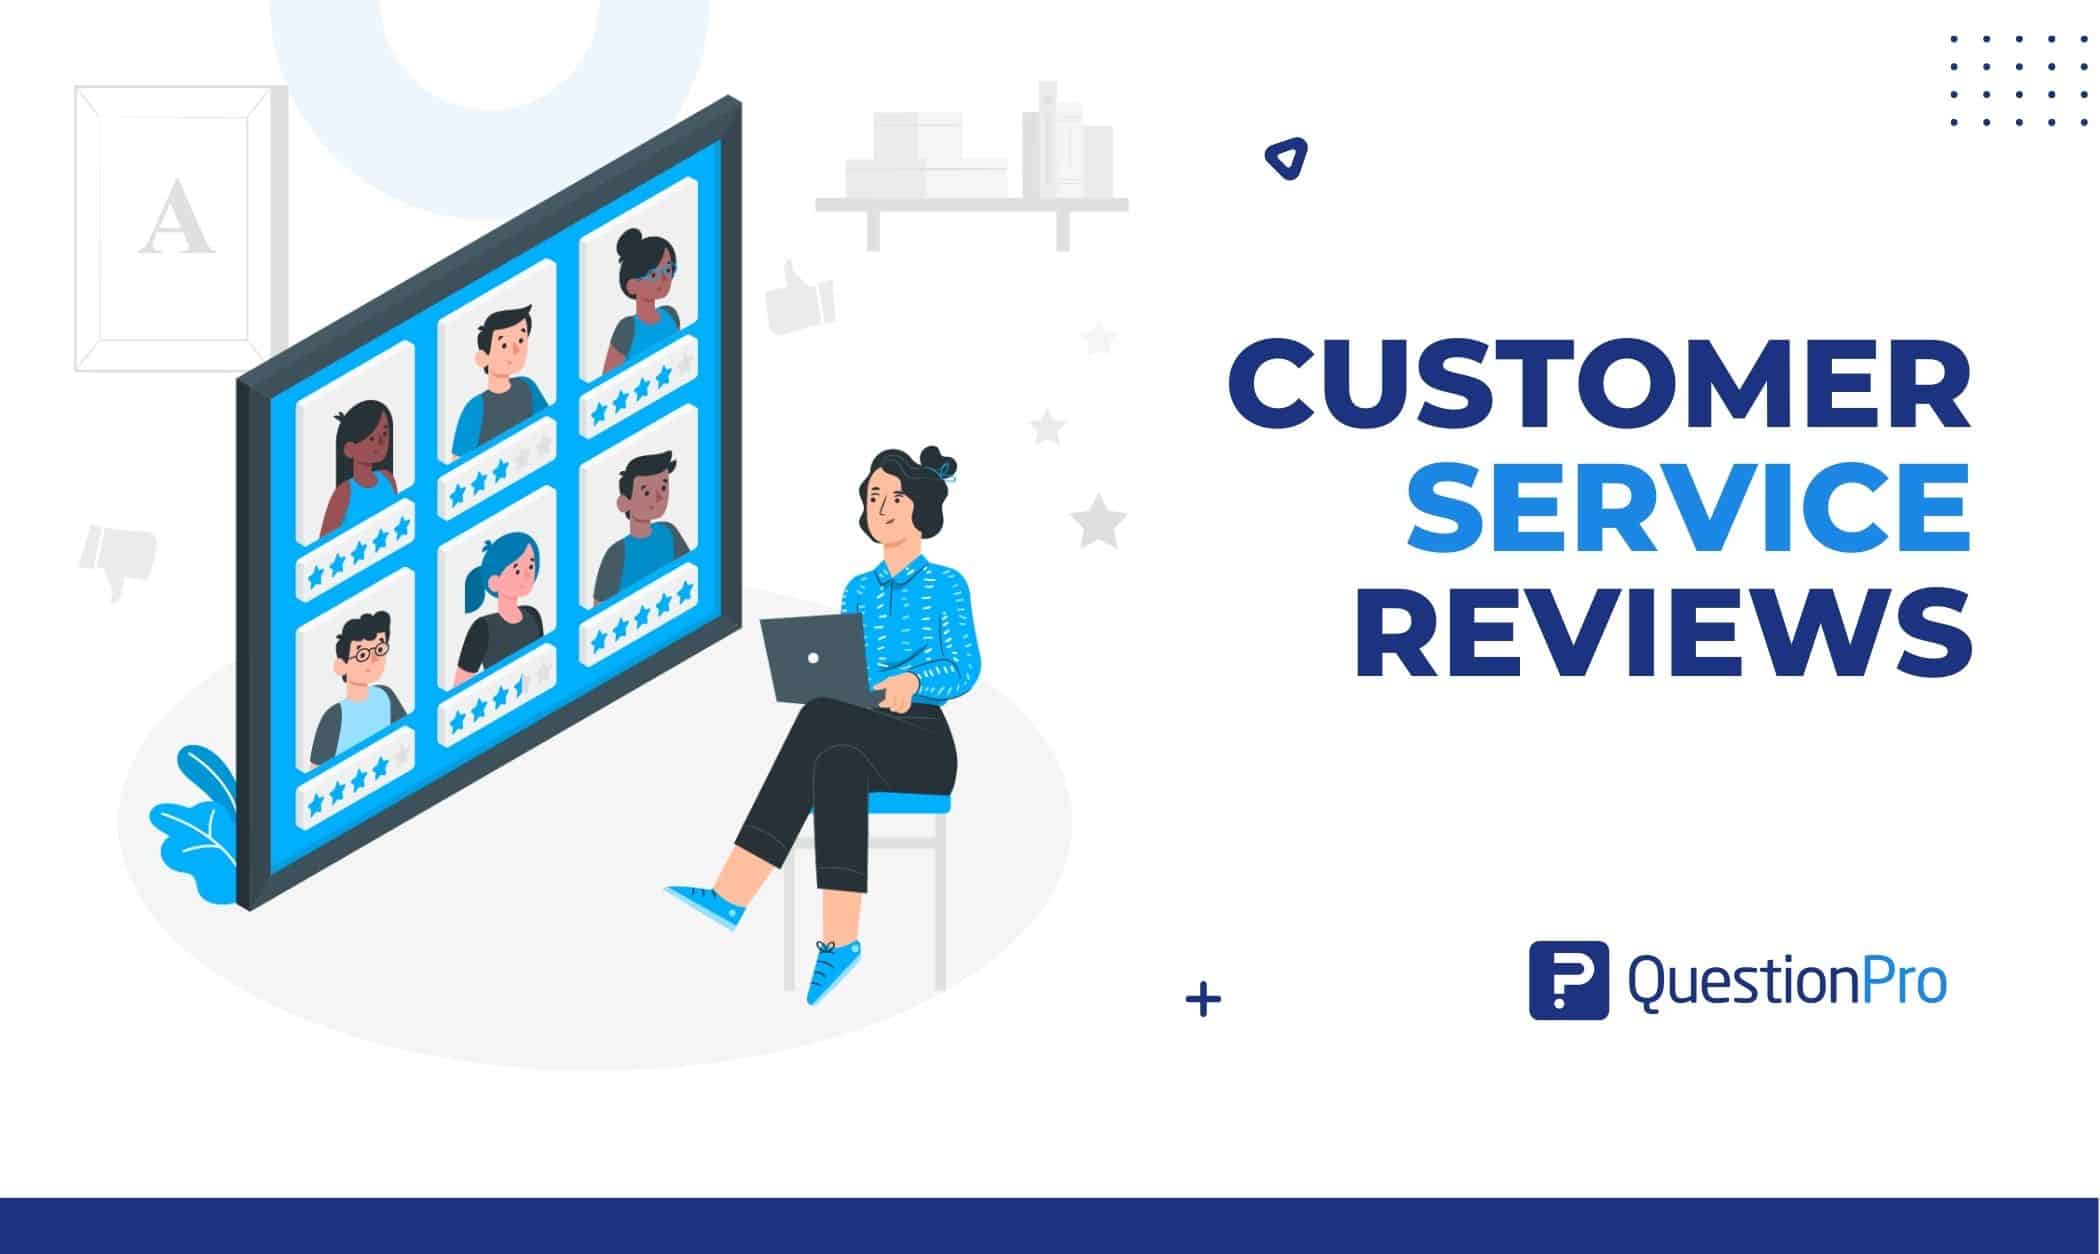 Customer service reviews benefit businesses and customers. Explore further to learn its importance and effective management techniques.